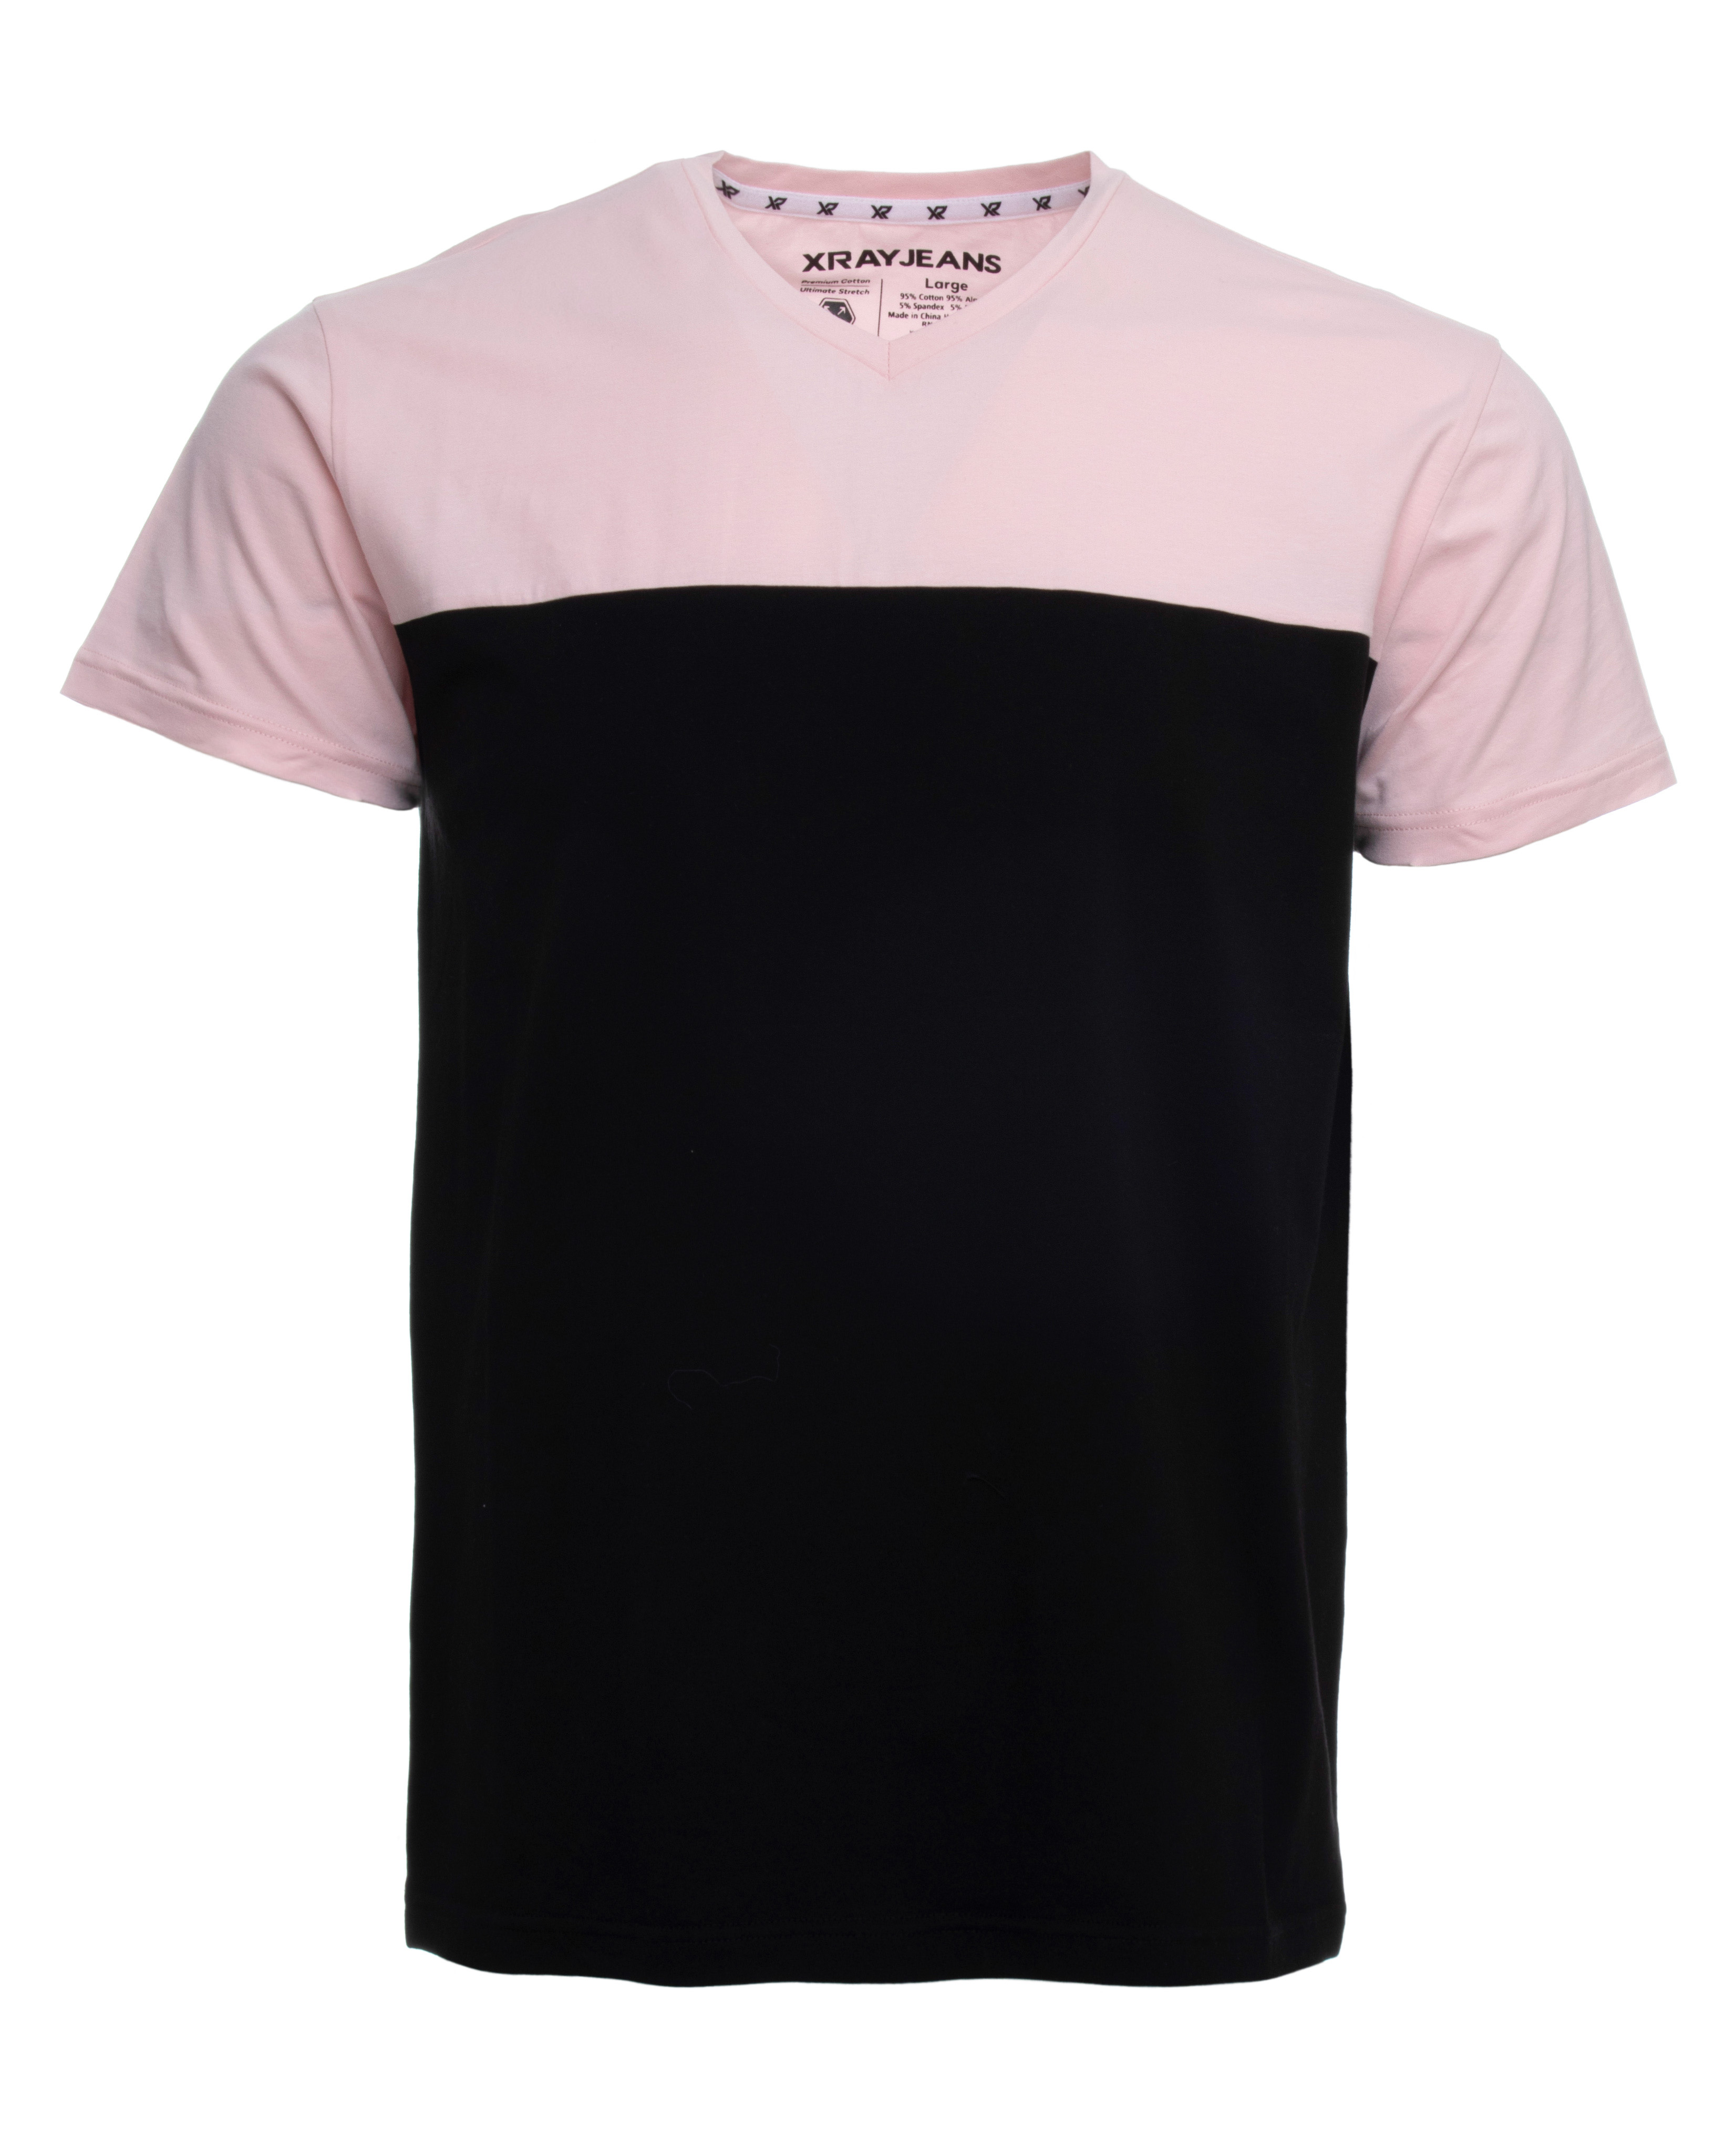 X RAY Men's Soft Stretch Cotton Solid Colorblock Short Sleeve V-Neck Slim Fit T-Shirt, Fashion Sport Casual Tee for Men, Black/Baby Pink Size Medium - image 1 of 4